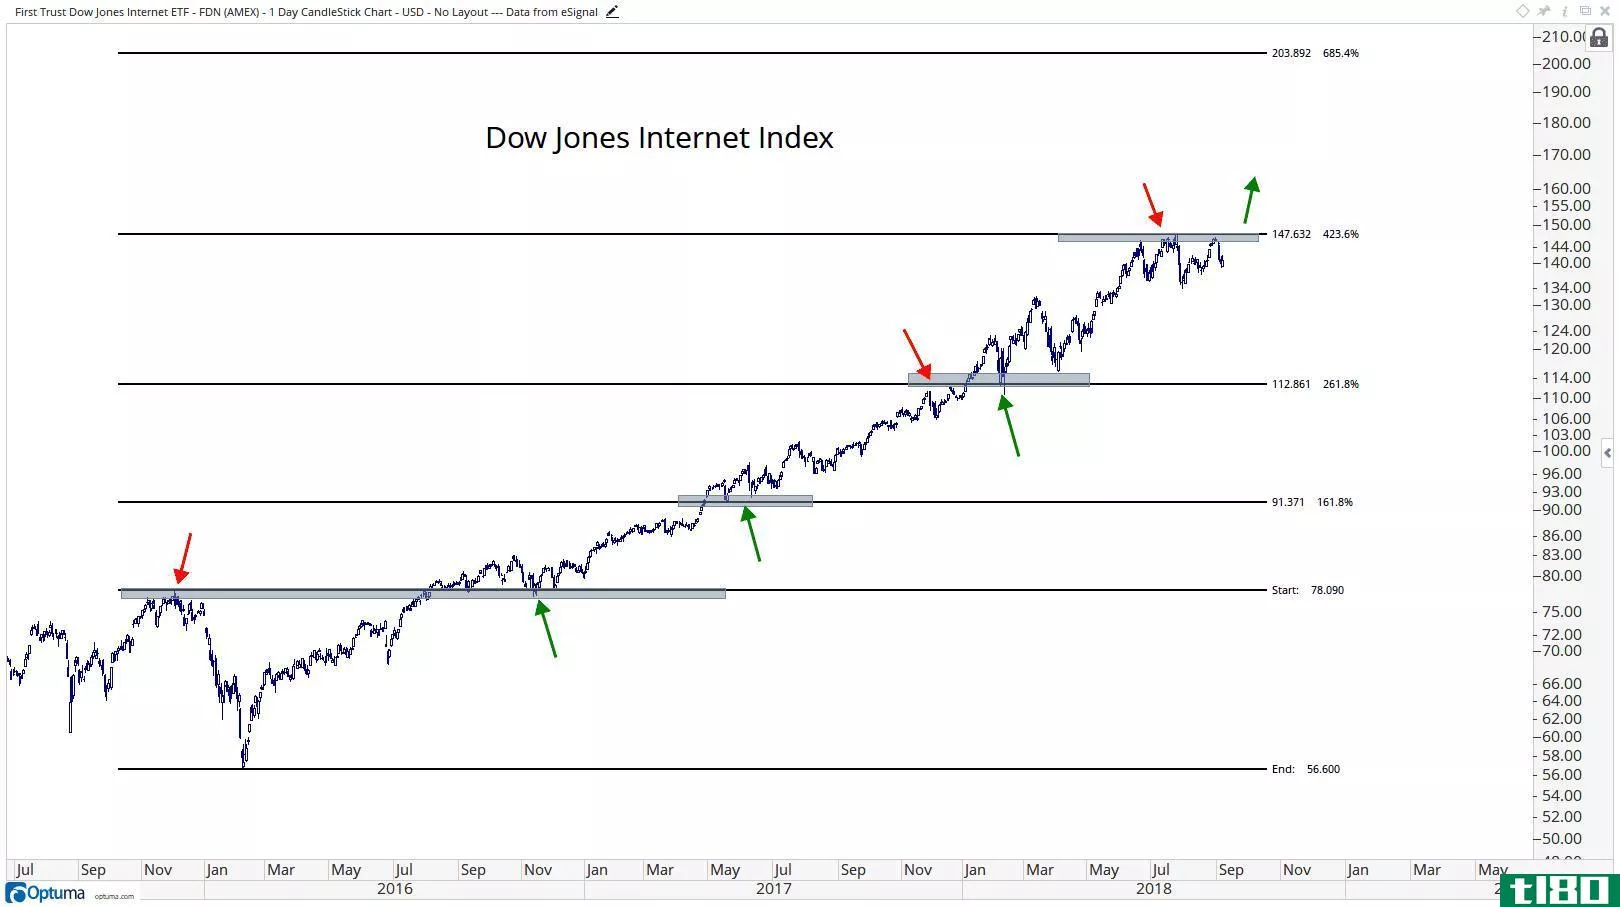 Technical chart showing the performance of the First Trust Dow Jones Internet ETF (FDN)